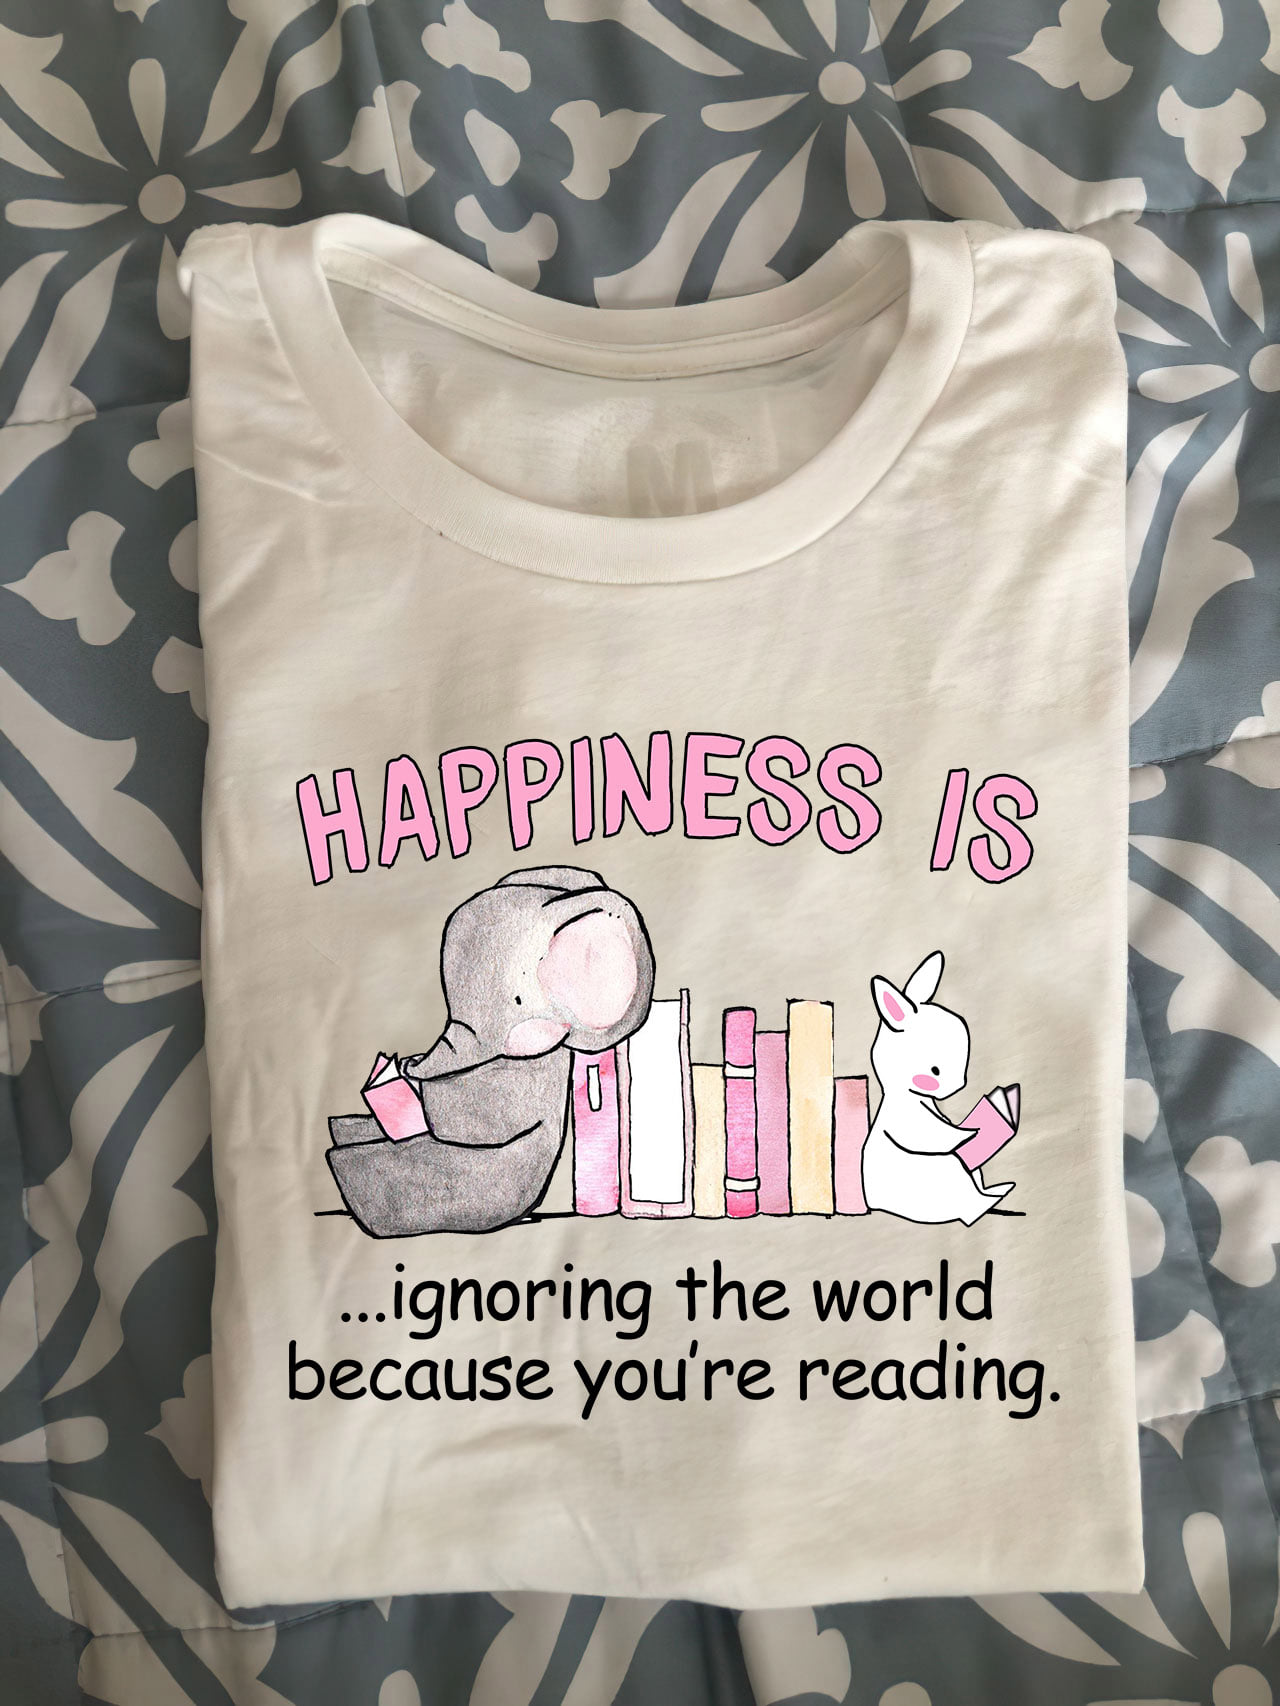 Happiness is ignoring the world because you're reading - Elephant and rabbit